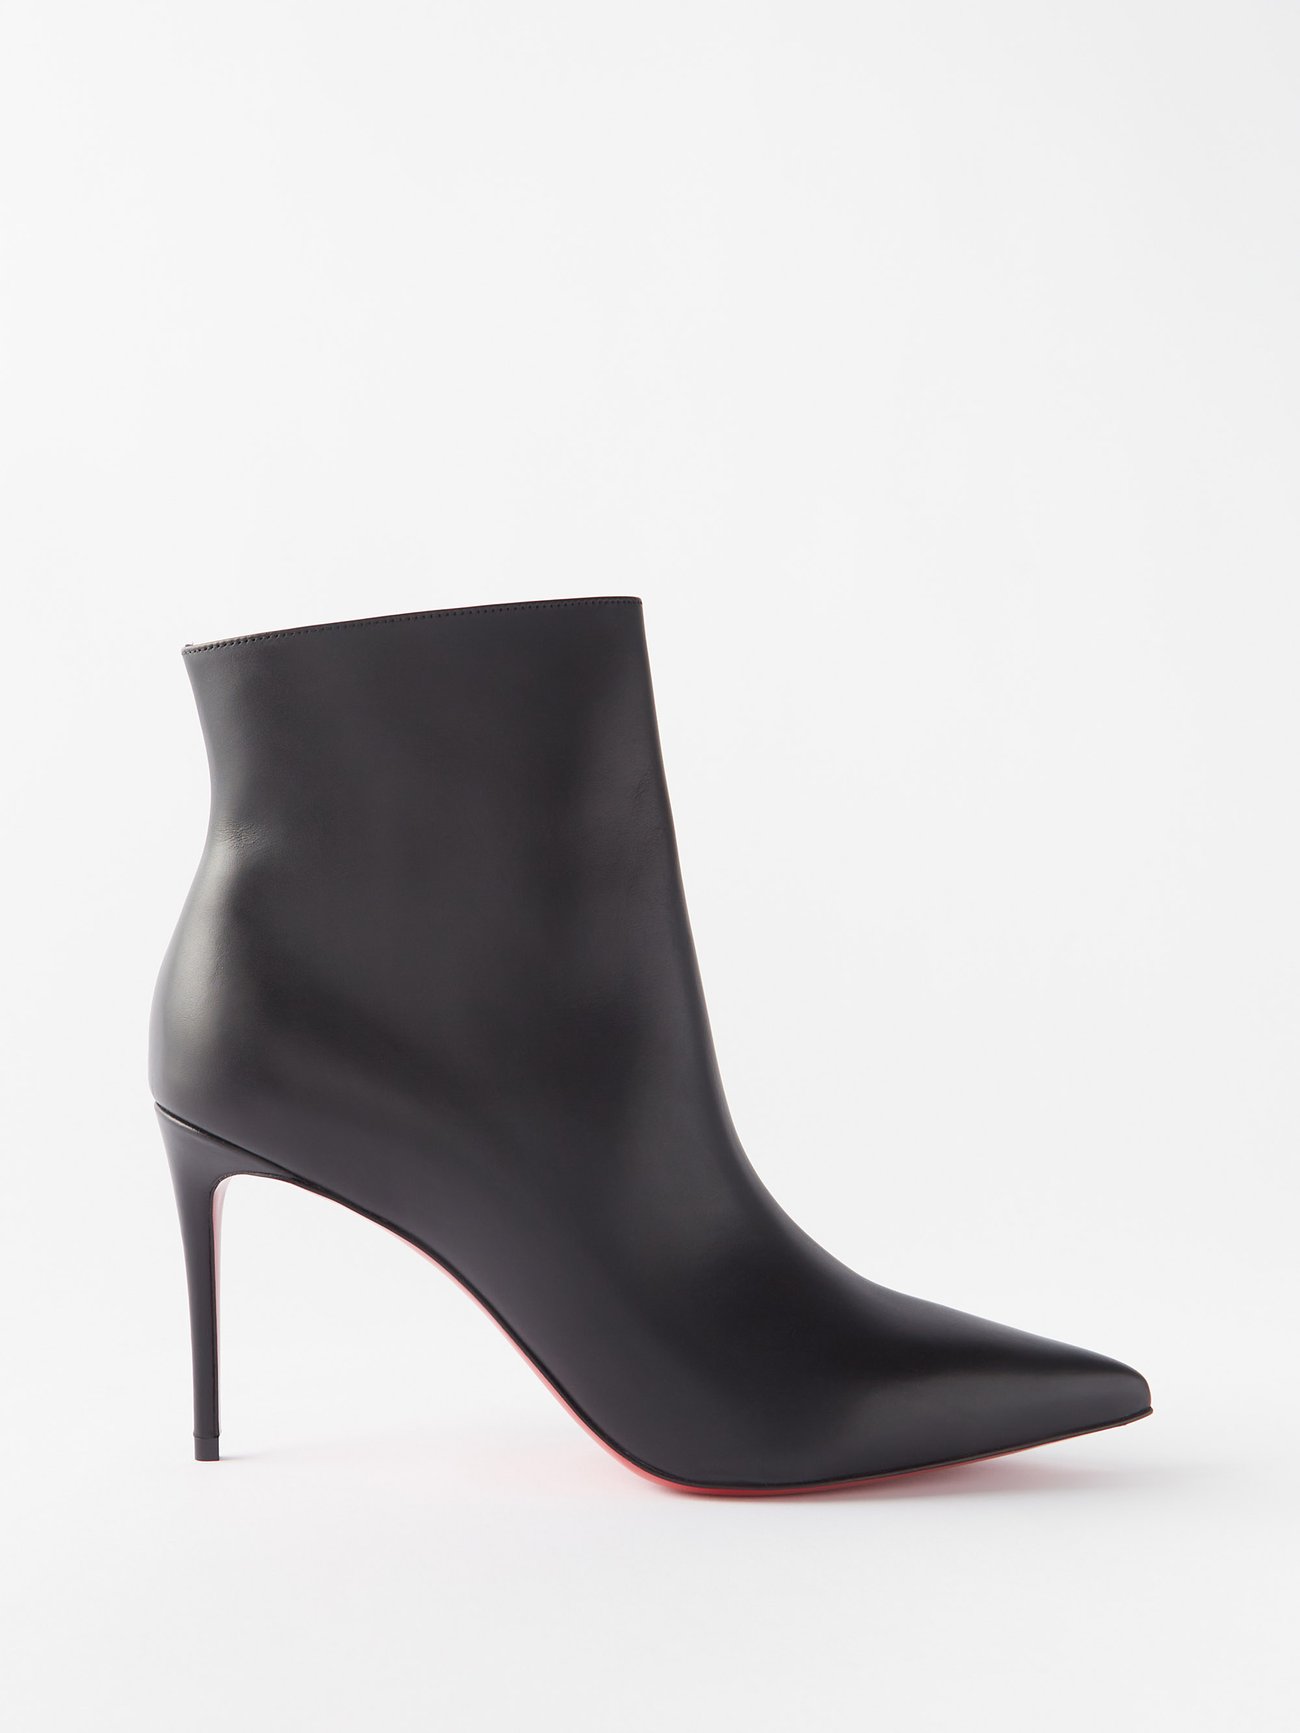 Black So Kate 85 leather ankle boots | Christian Louboutin ...